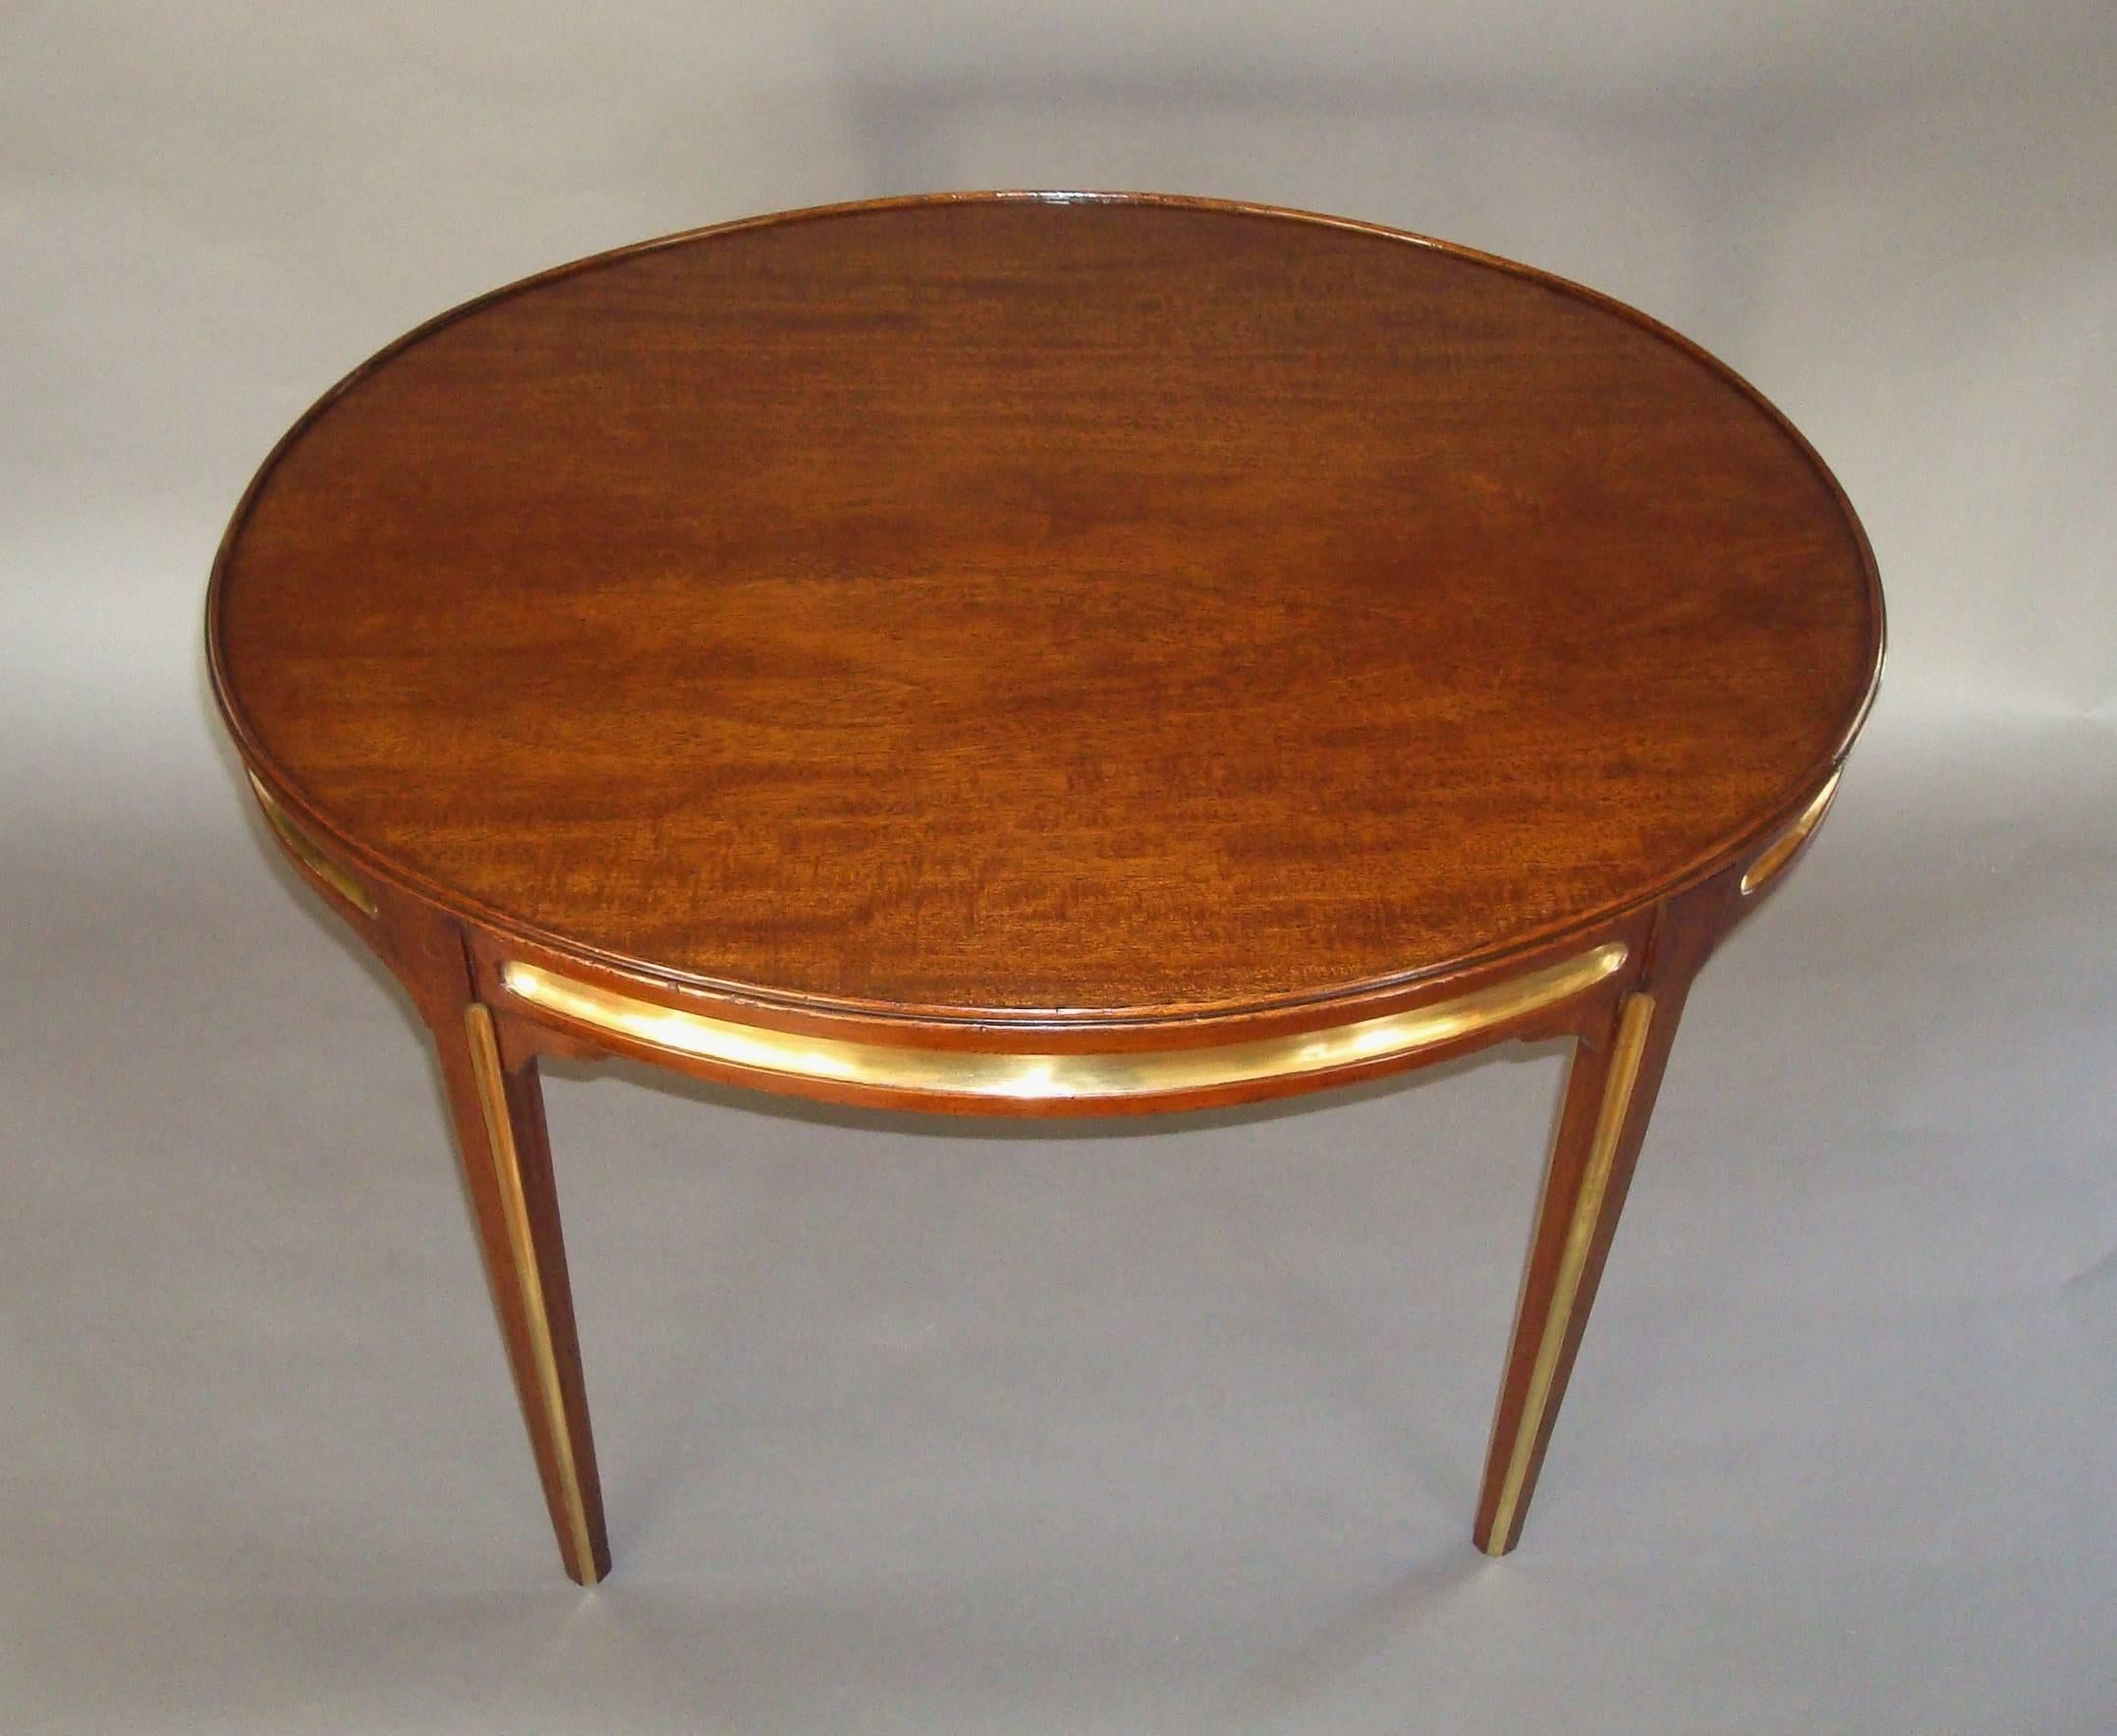 Early 20th Century Oval Mahogany and Brass Low Table In Excellent Condition For Sale In Moreton-in-Marsh, Gloucestershire